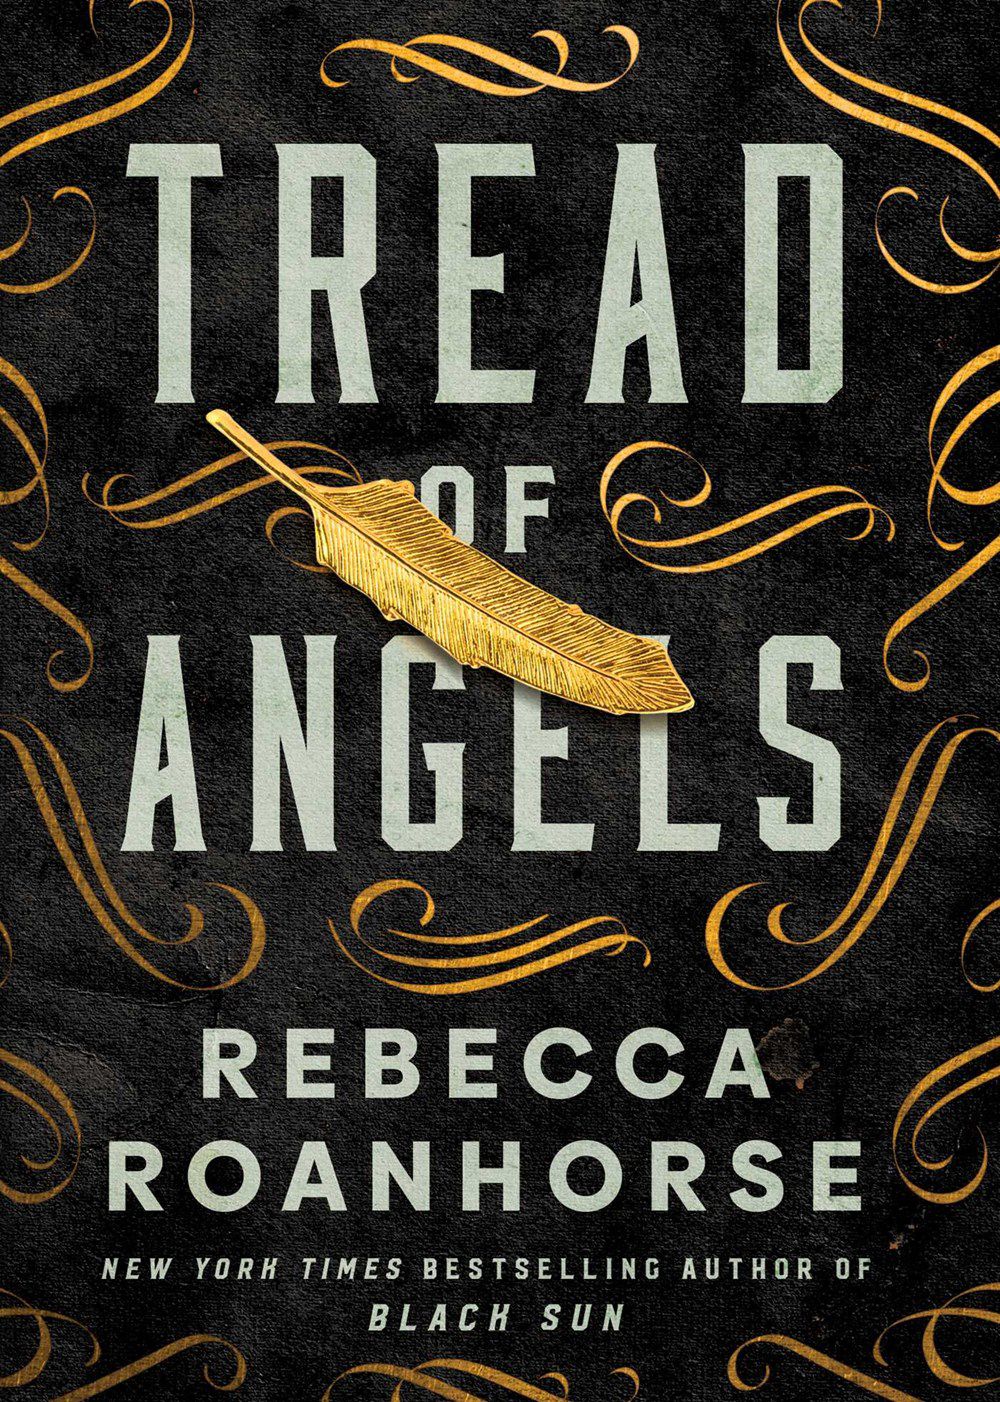 Cover of Rebecca Roanhorse's Tread of Angels, with a golden quill